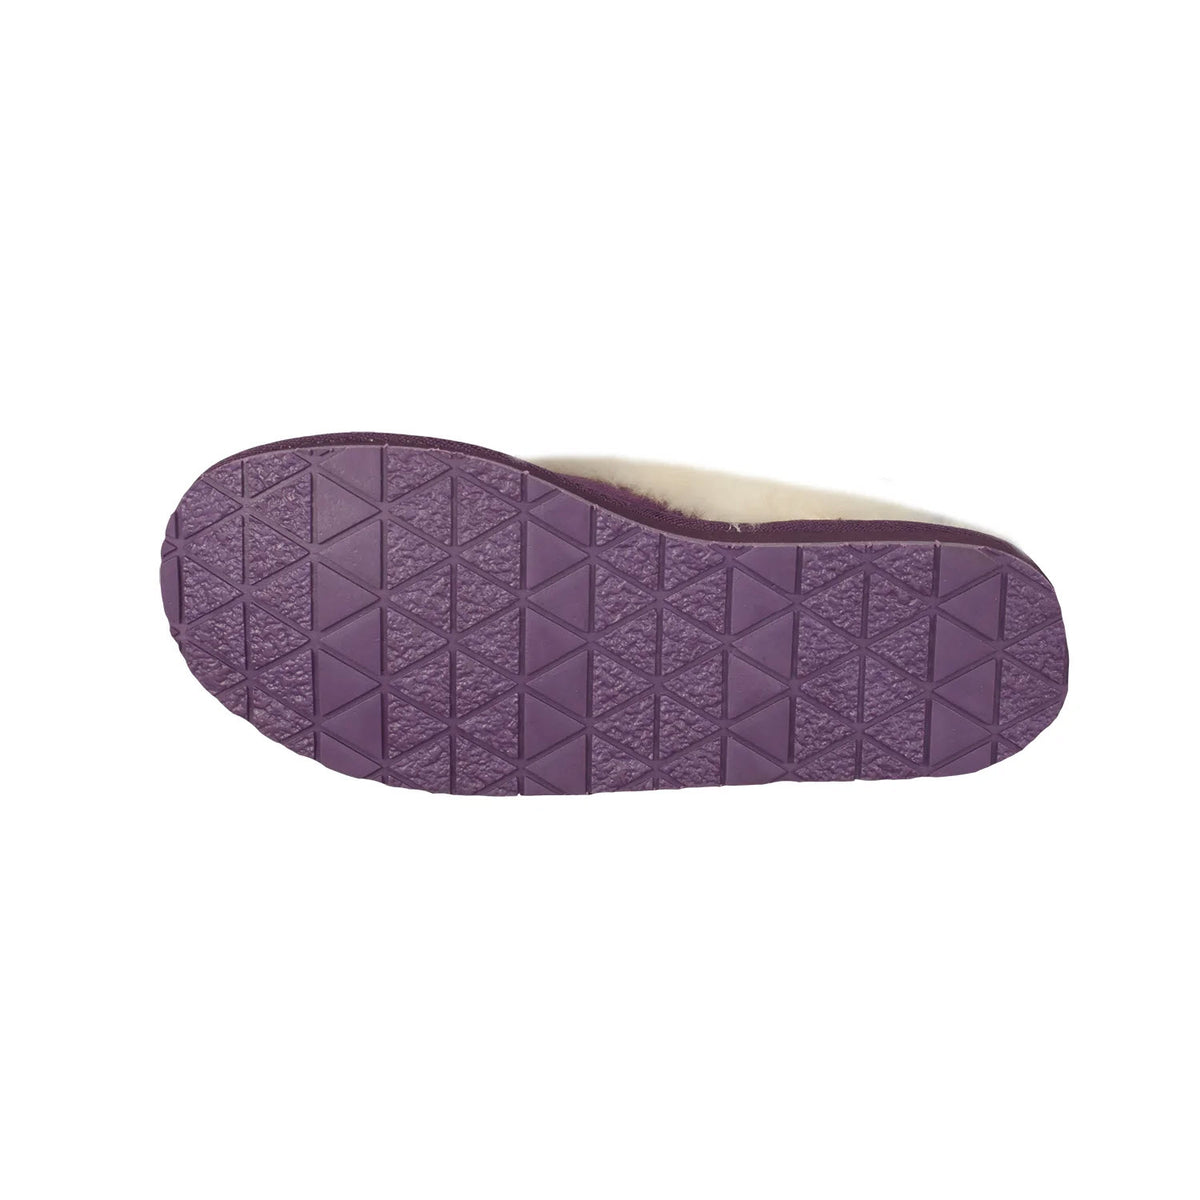 Bottom view of a Cloud Nine Ladies Scuff Purple slipper sliding into a textured sole and sheepskin lining, isolated on a white background.